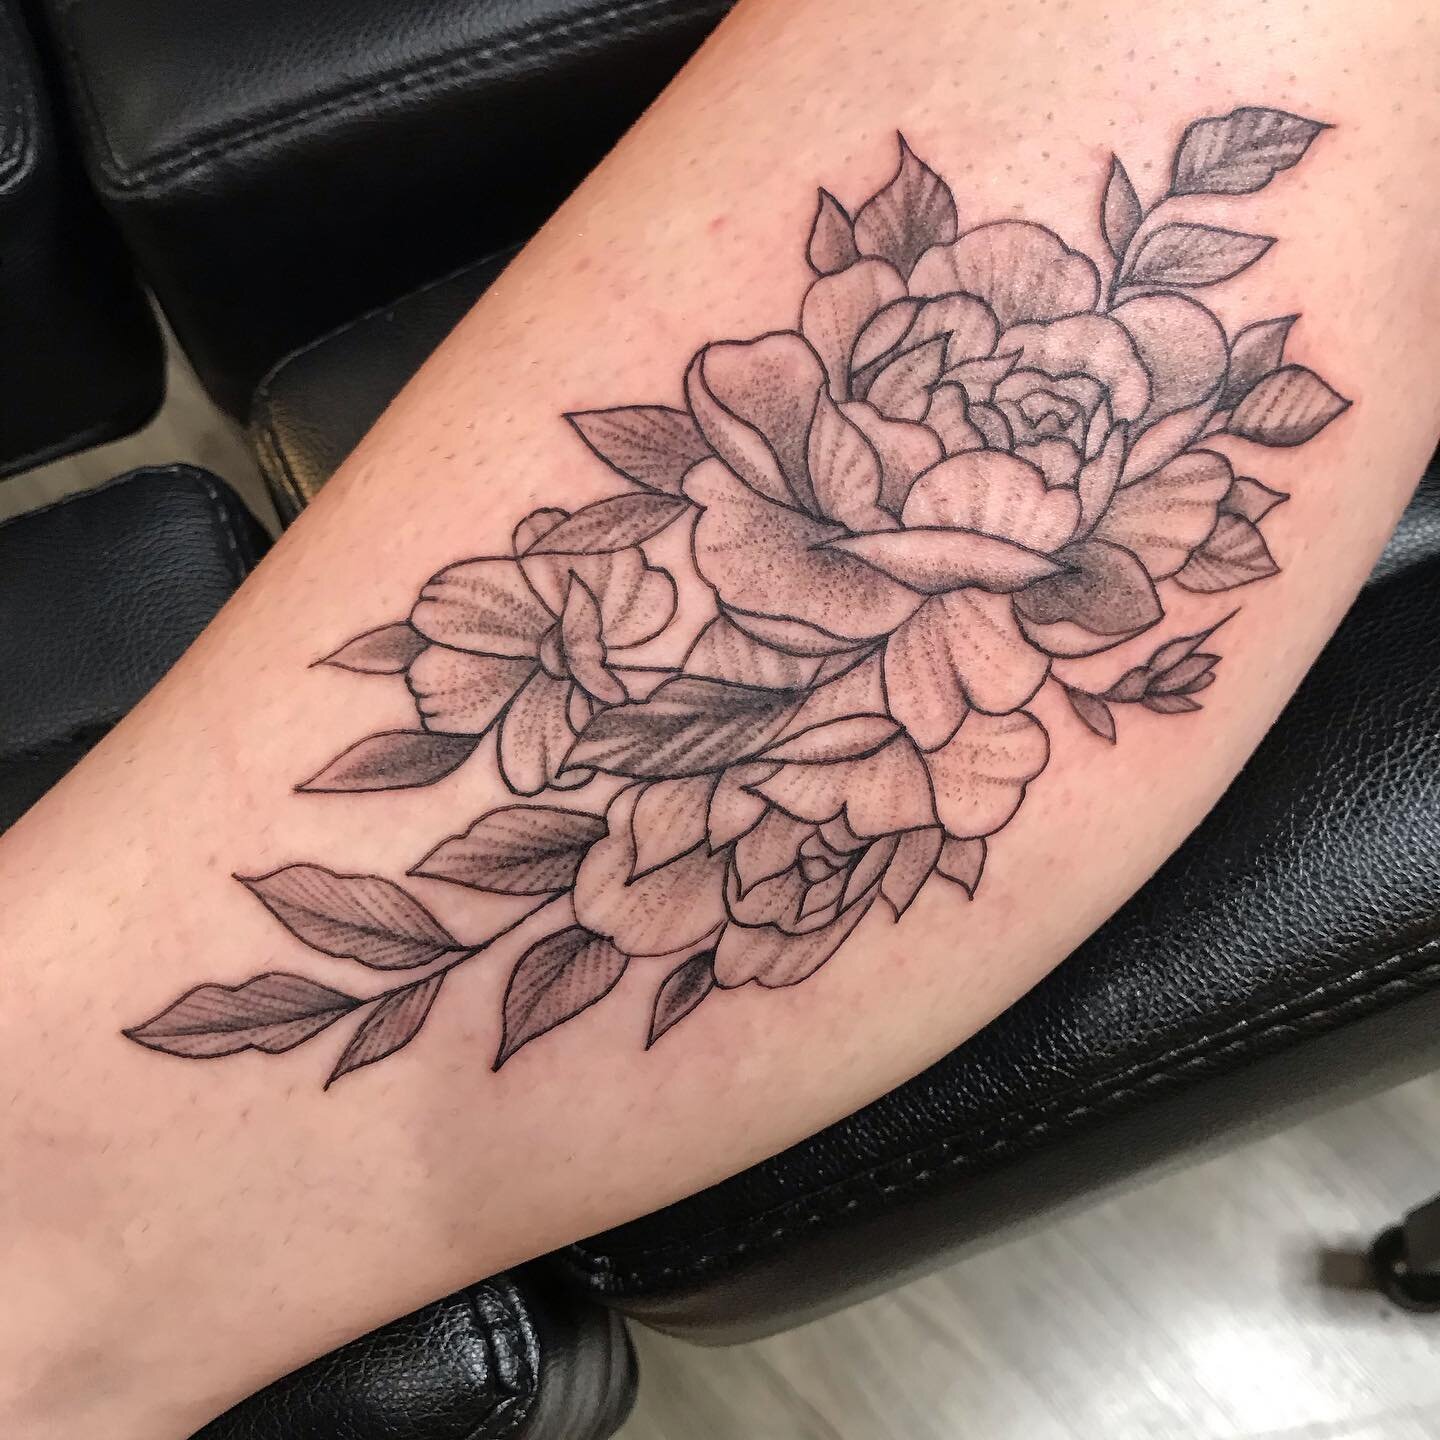 Dainty floral tattooed by @meganleigh1253